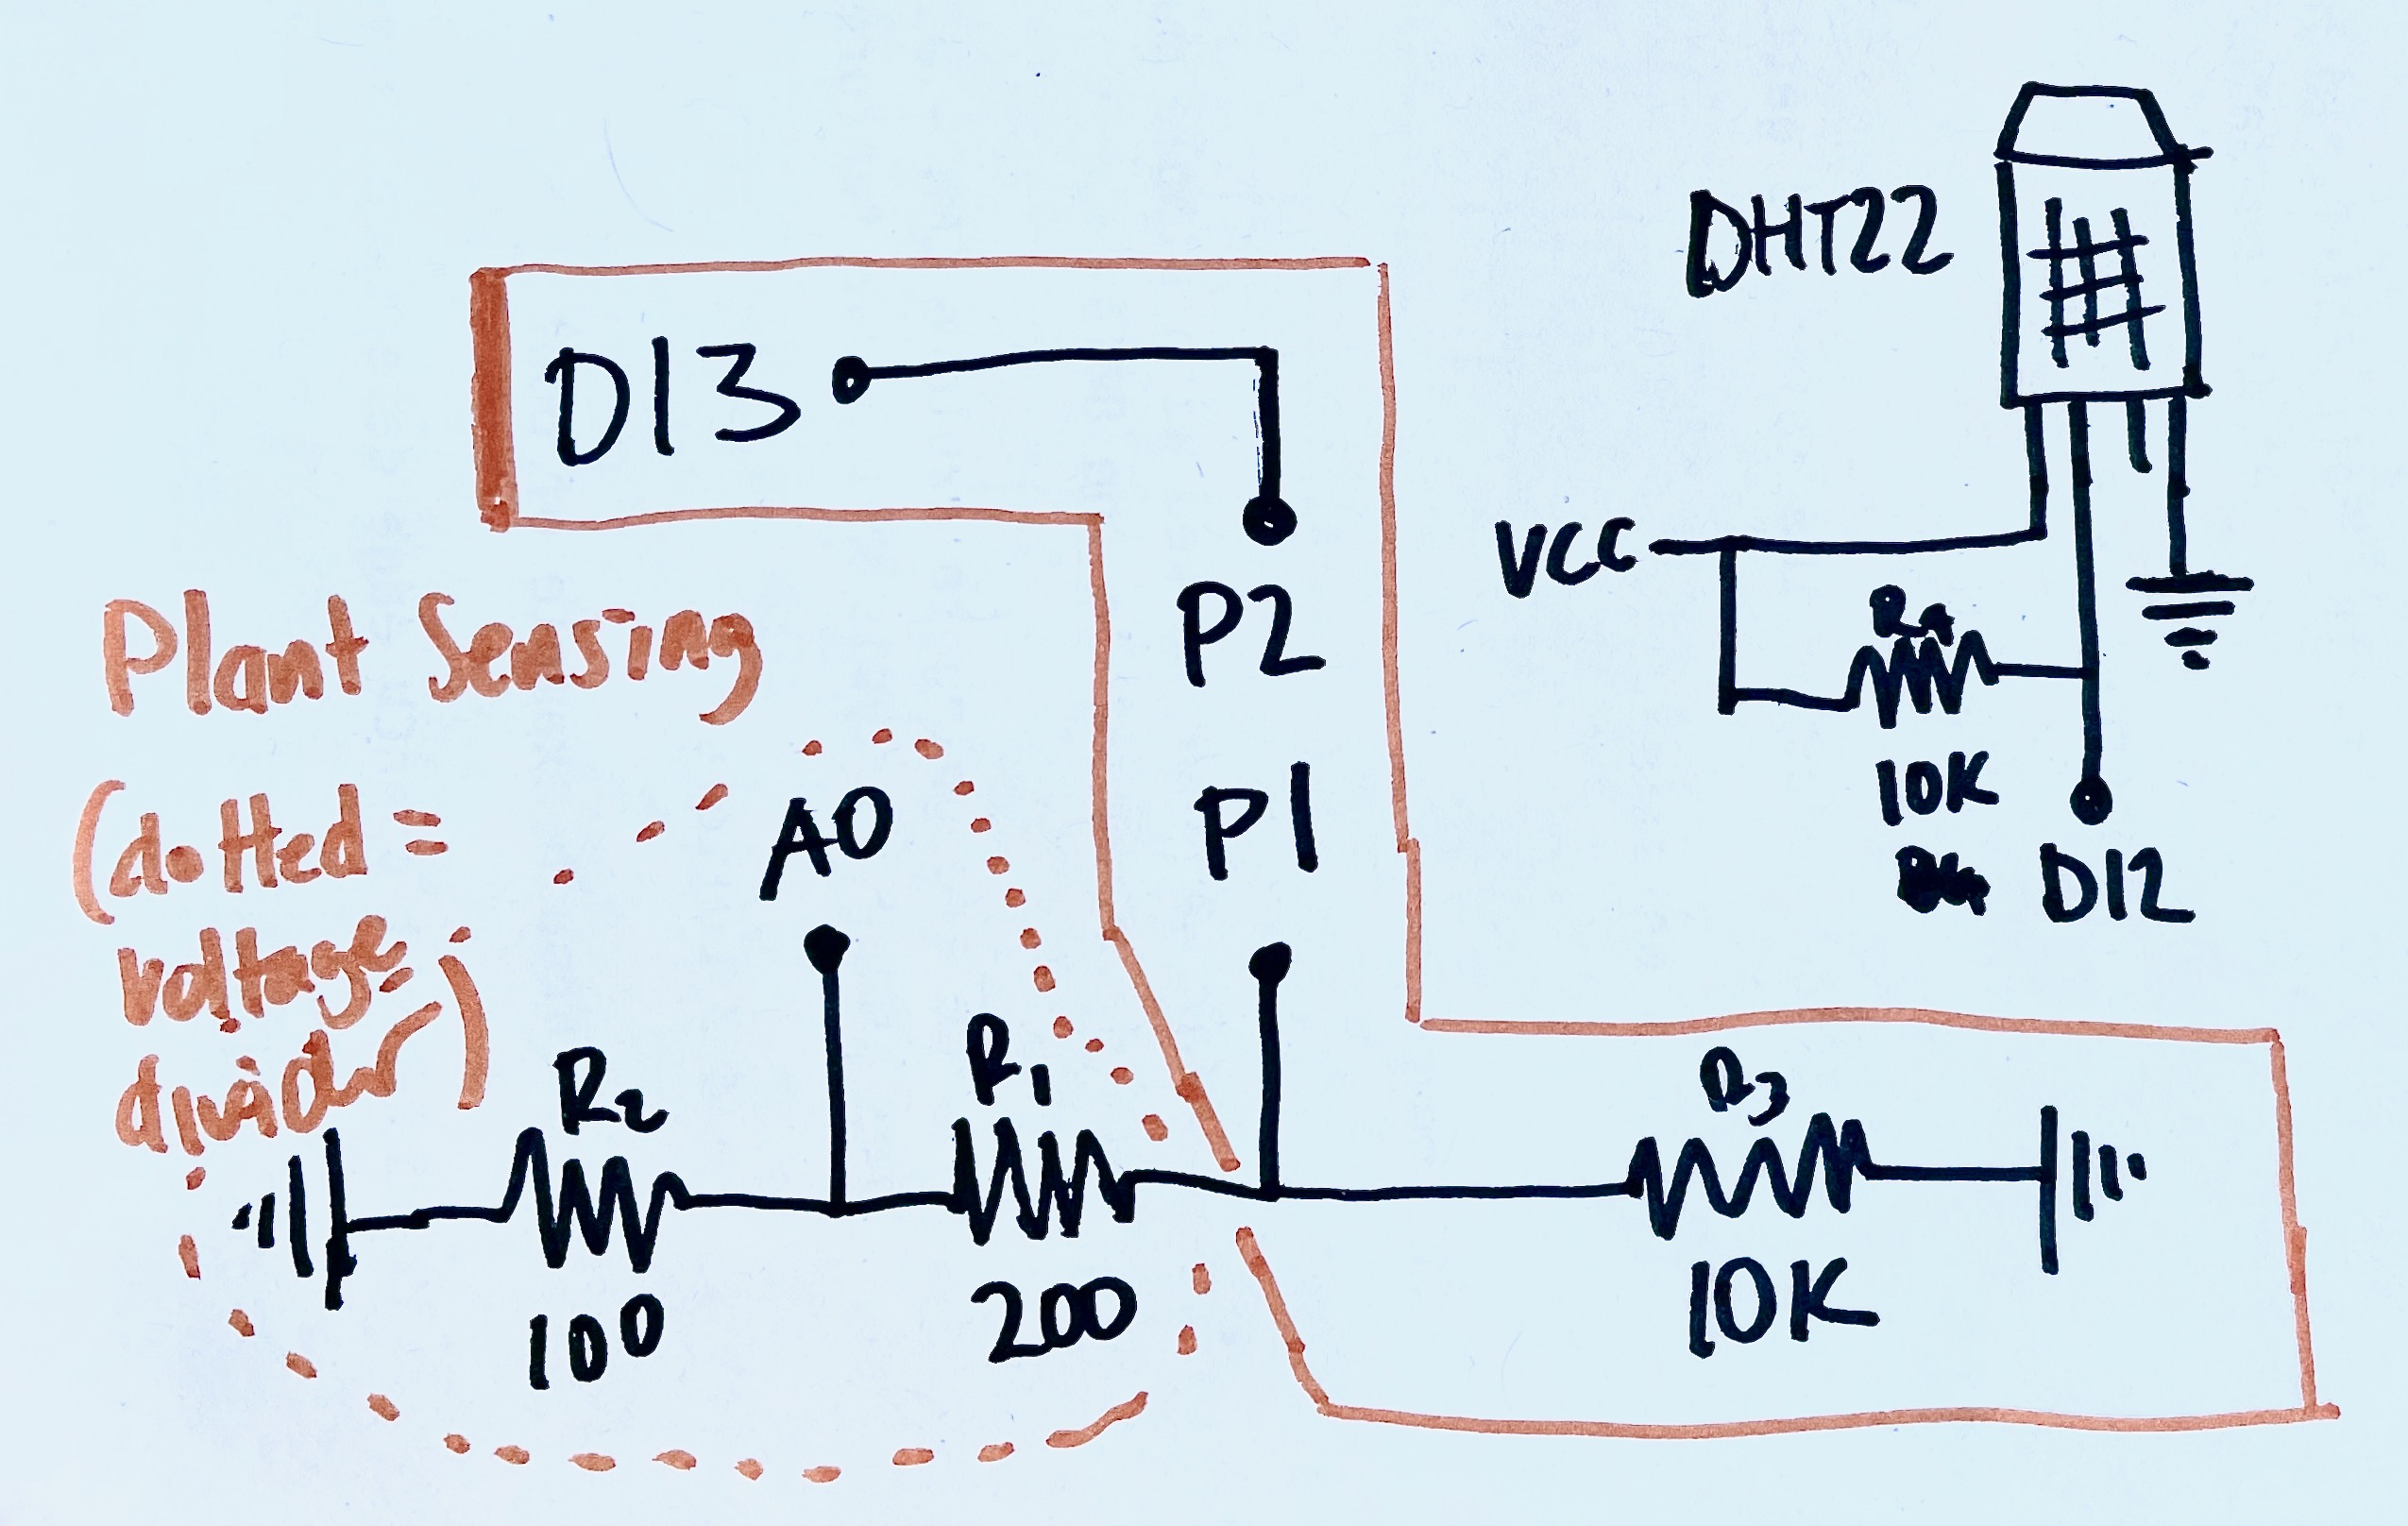 Sketch of circuit for DHT22 and Nail sensor